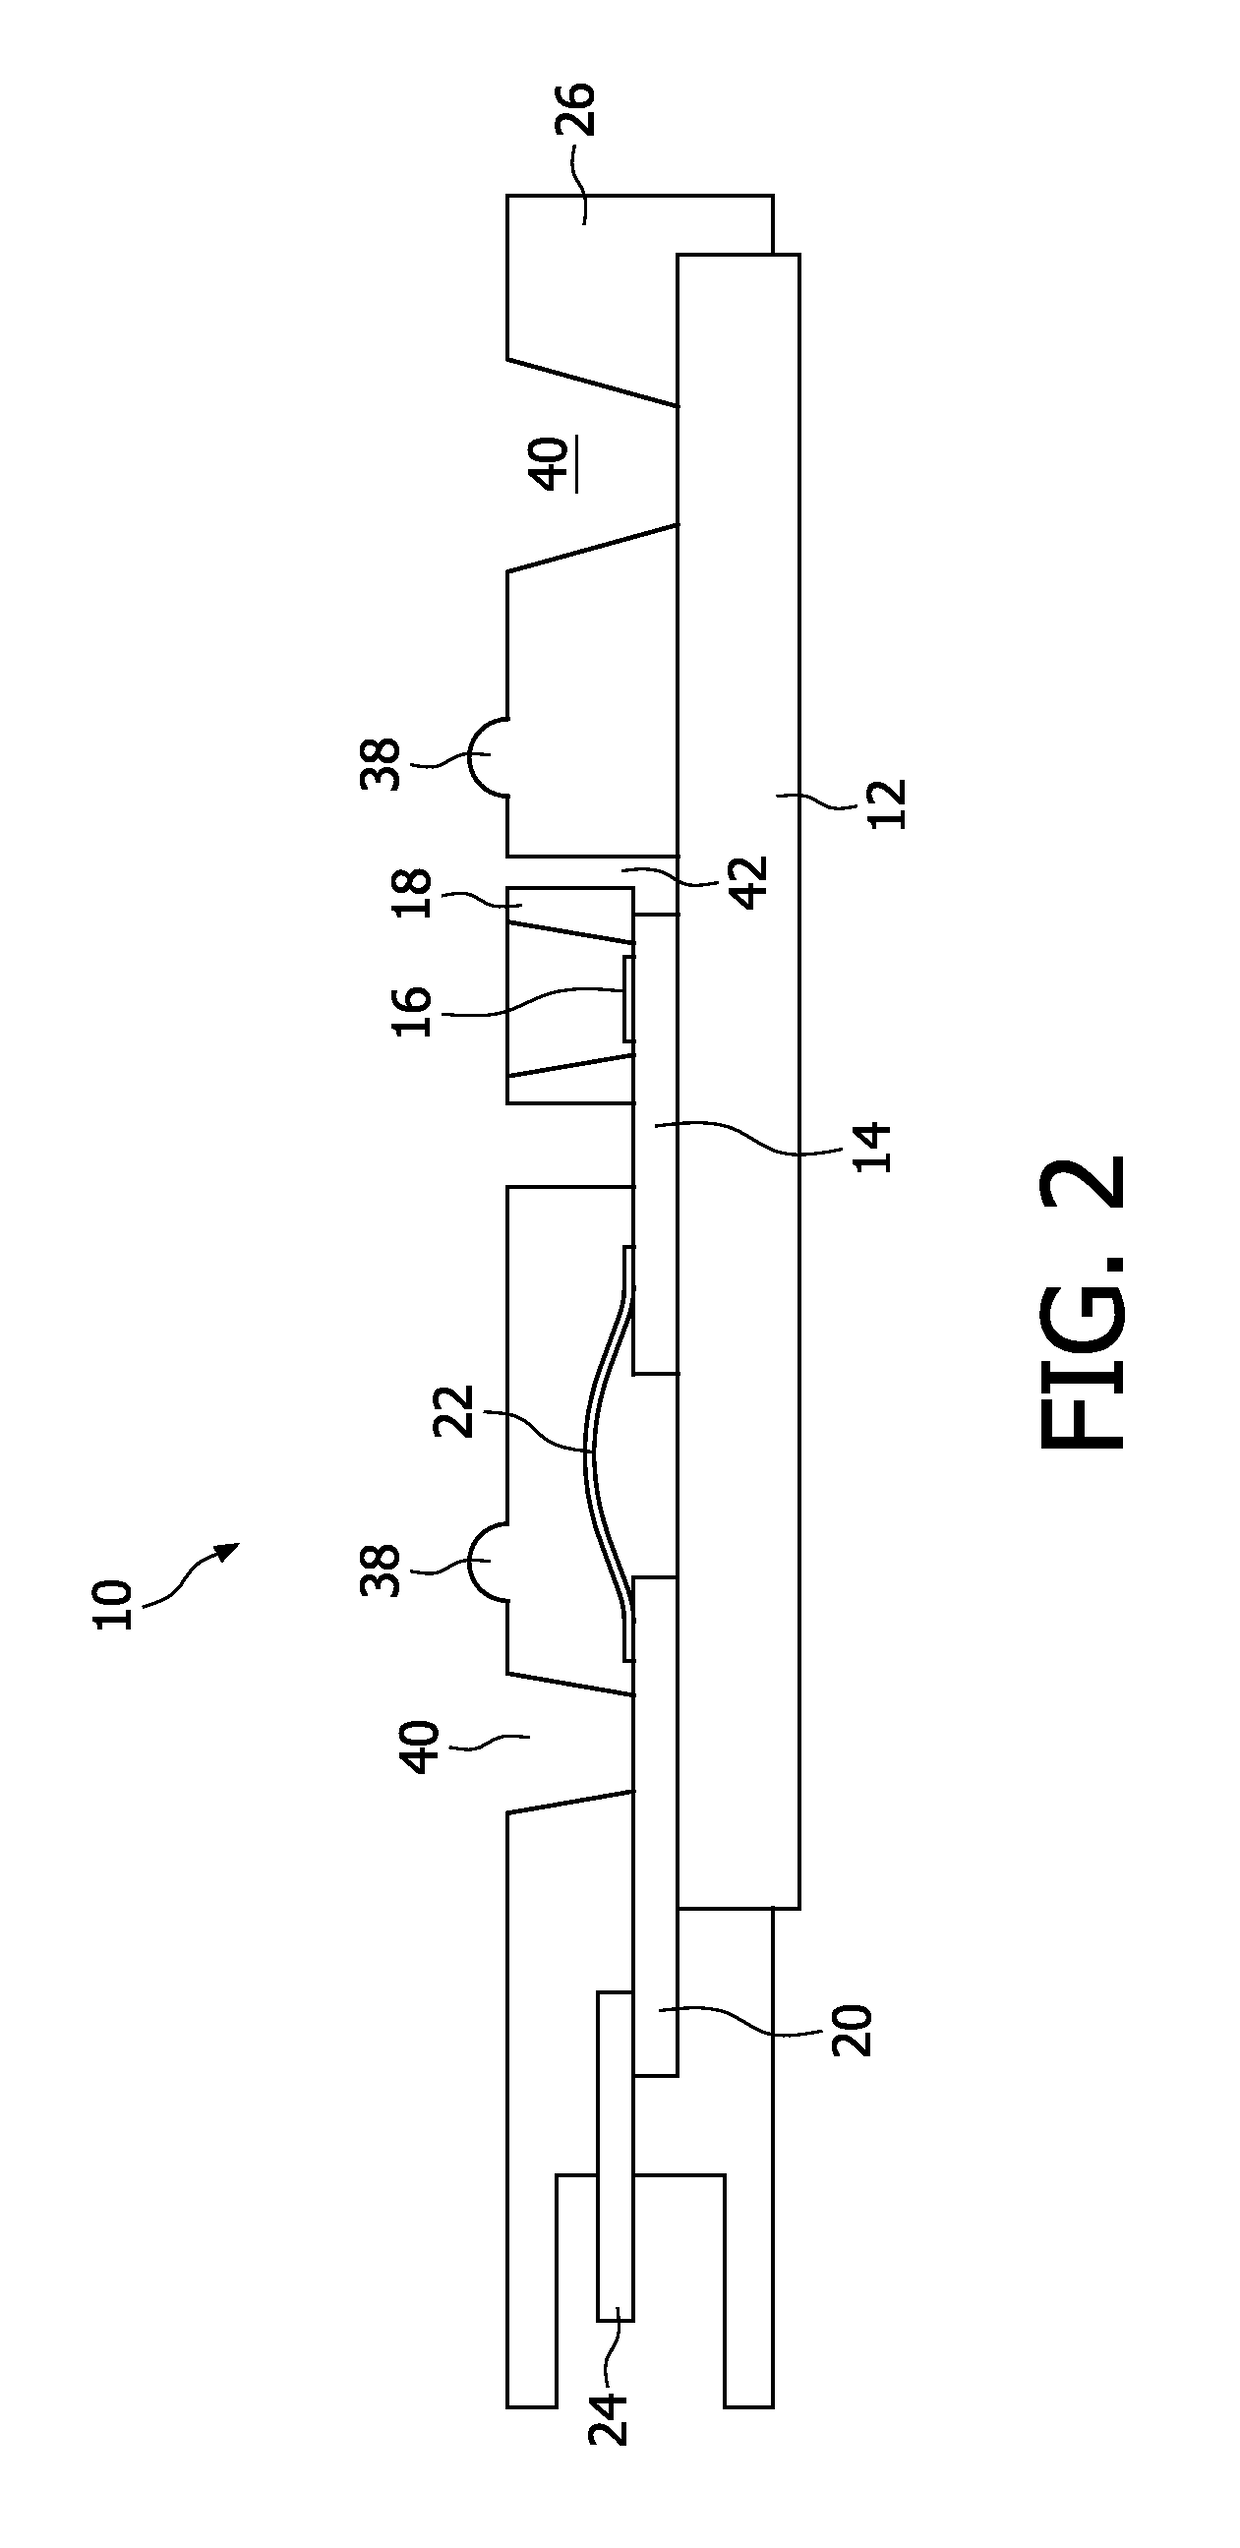 LED package and method for manufacturing the LED package